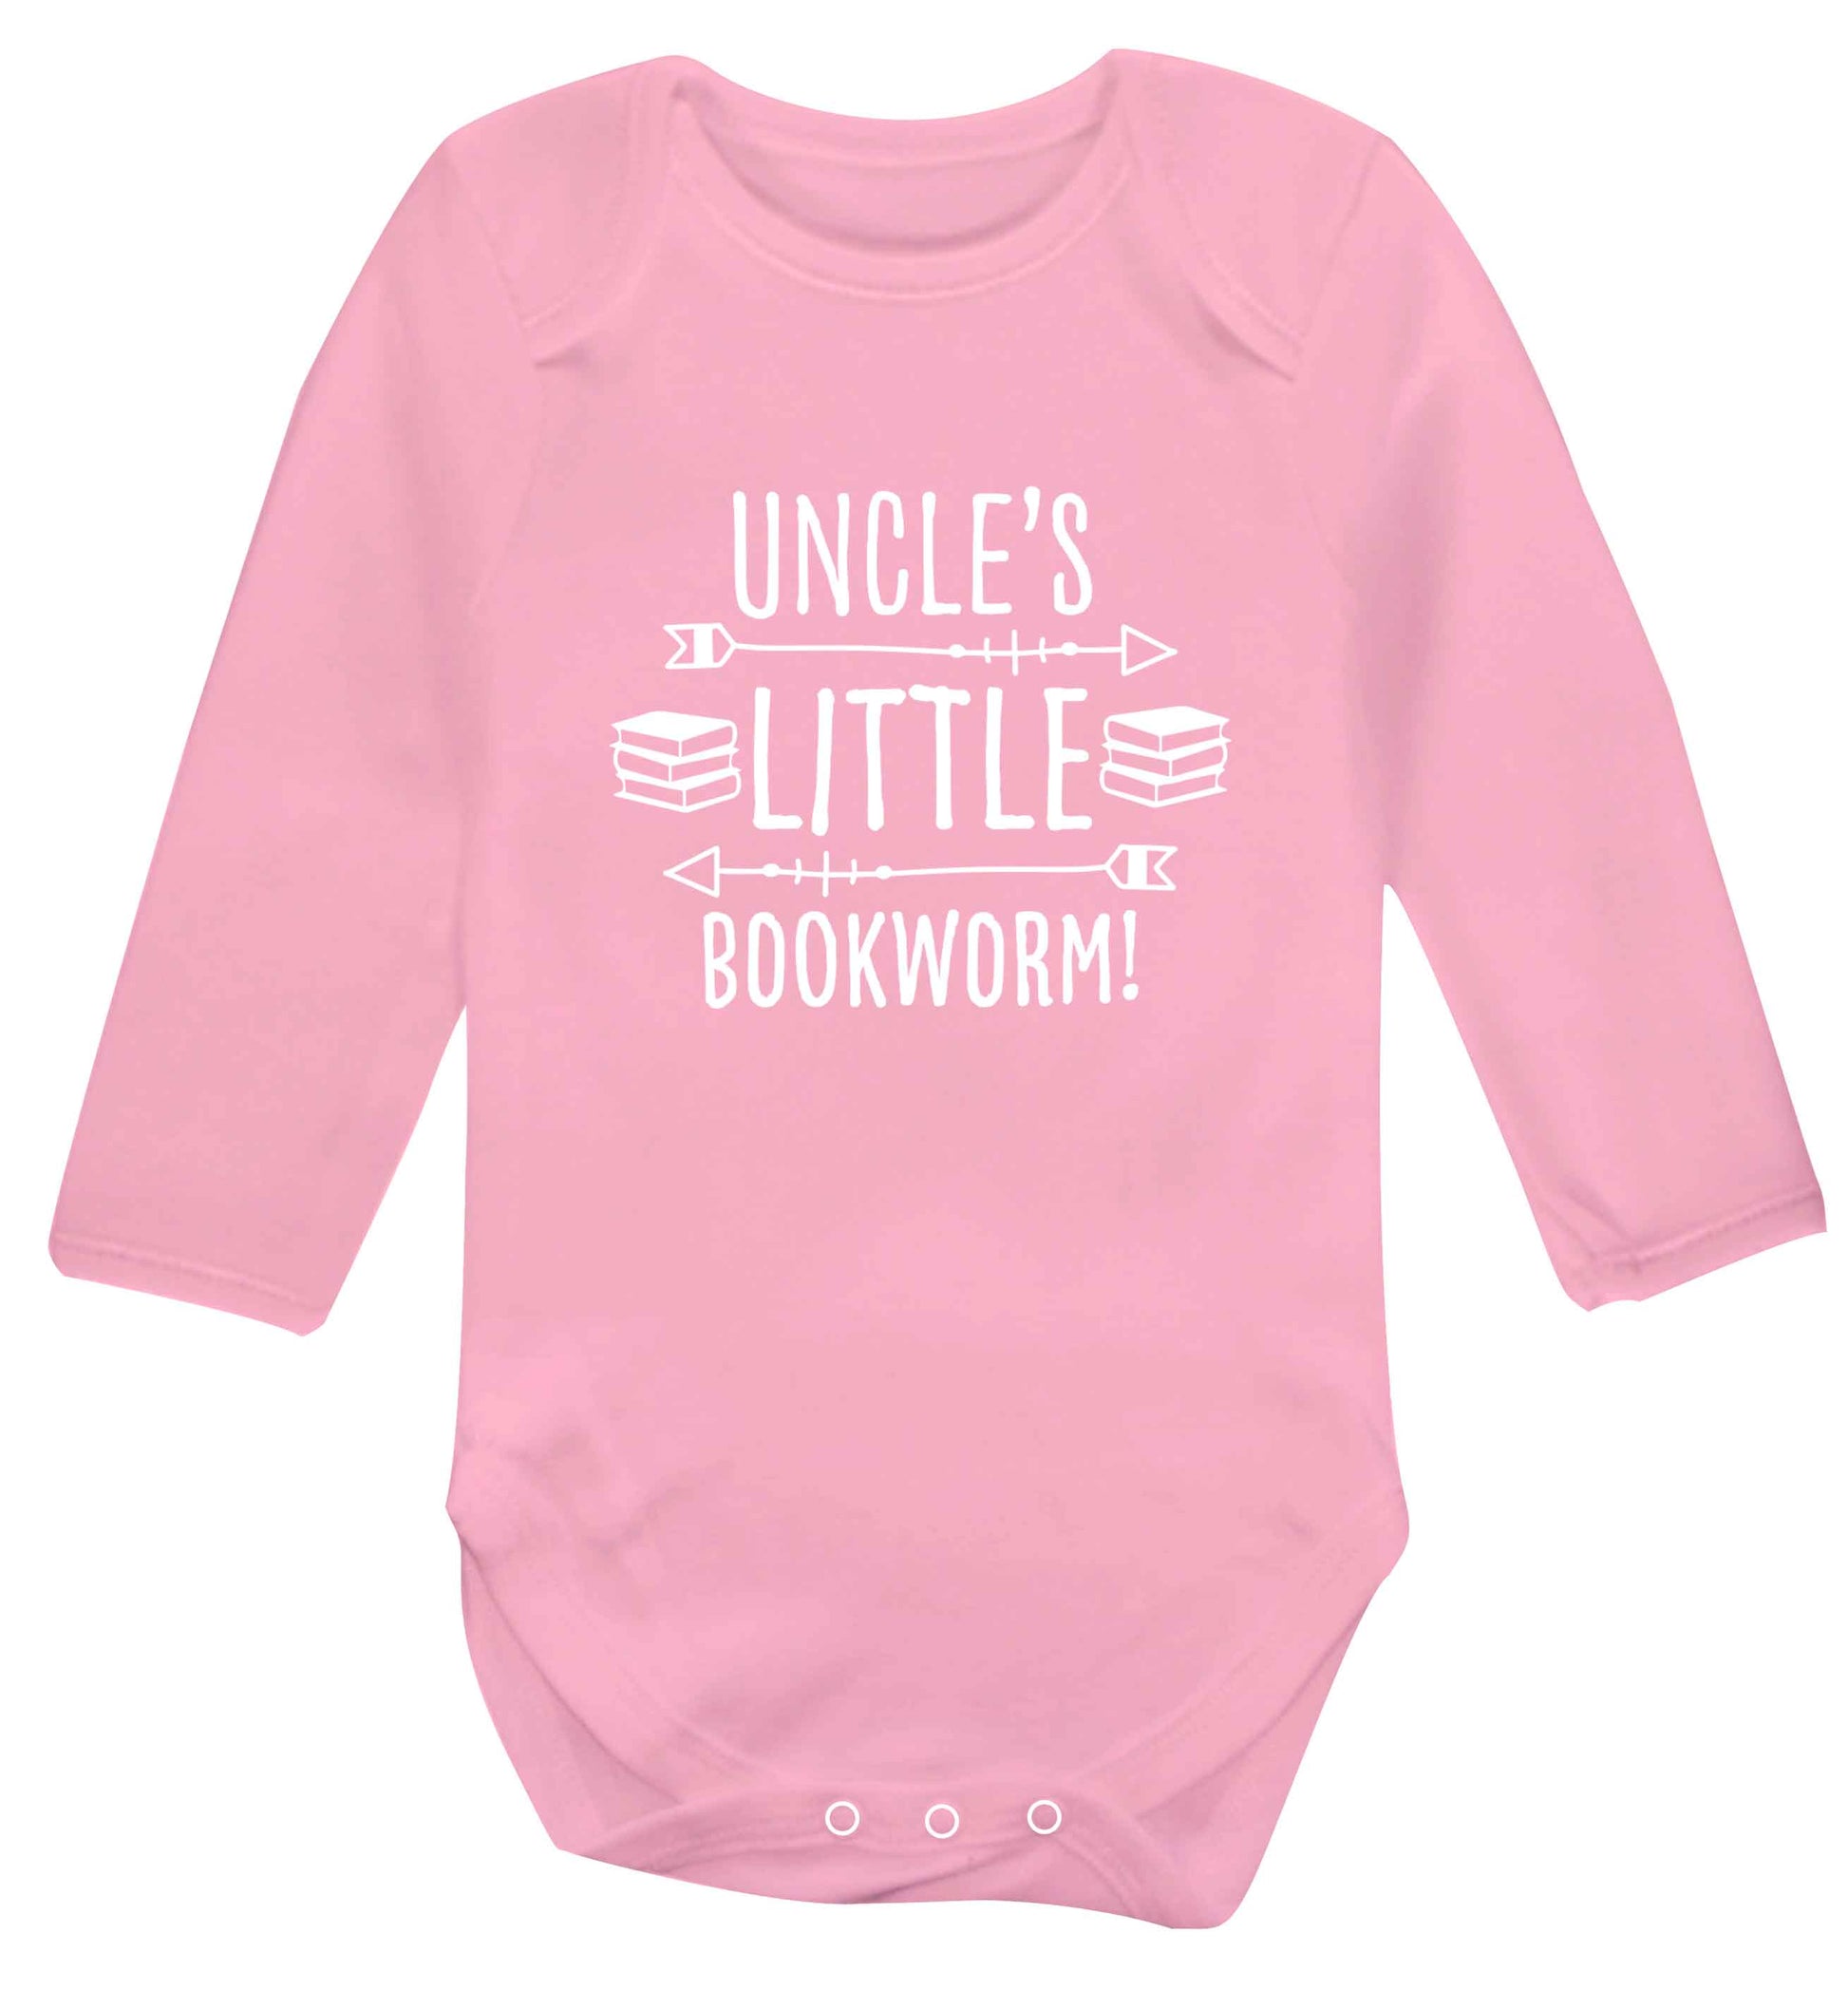 Uncle's little bookworm baby vest long sleeved pale pink 6-12 months